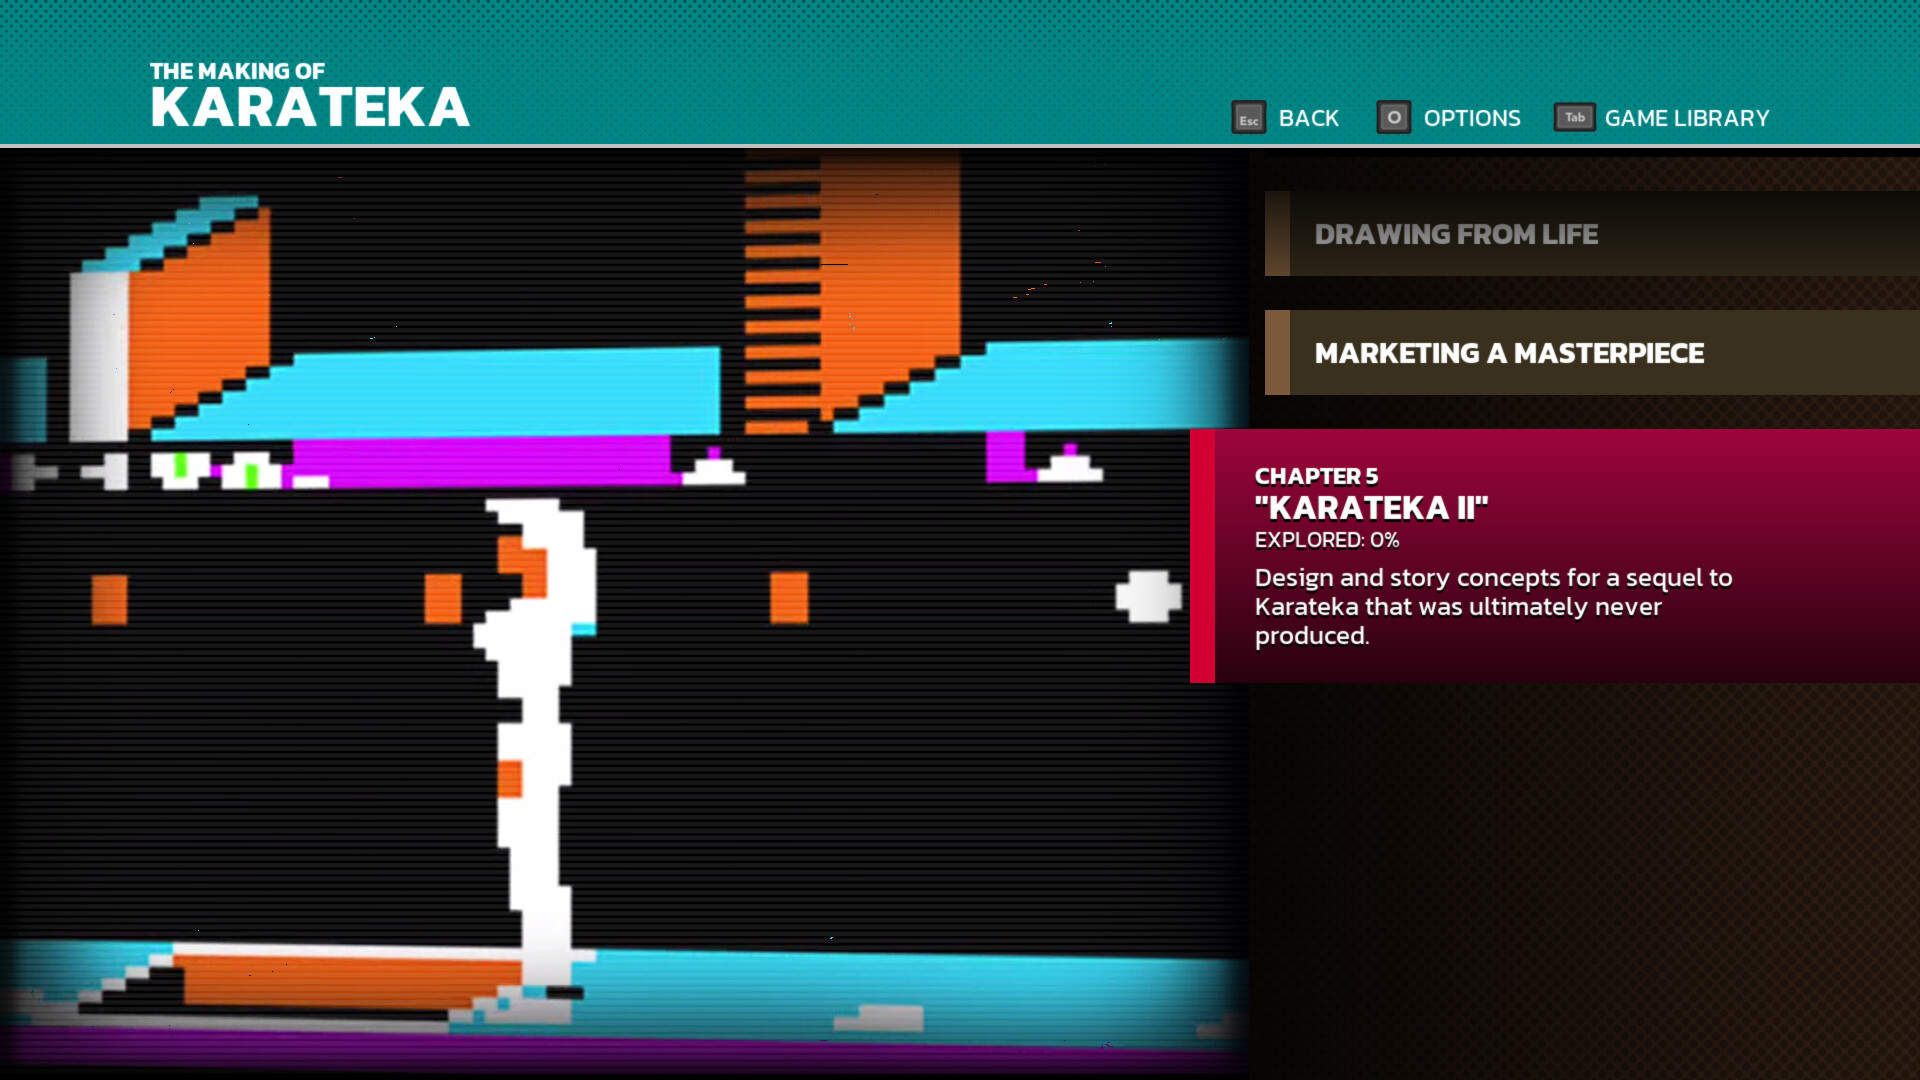 The Making of Karateka Review: An Interactive Video Game Documentary